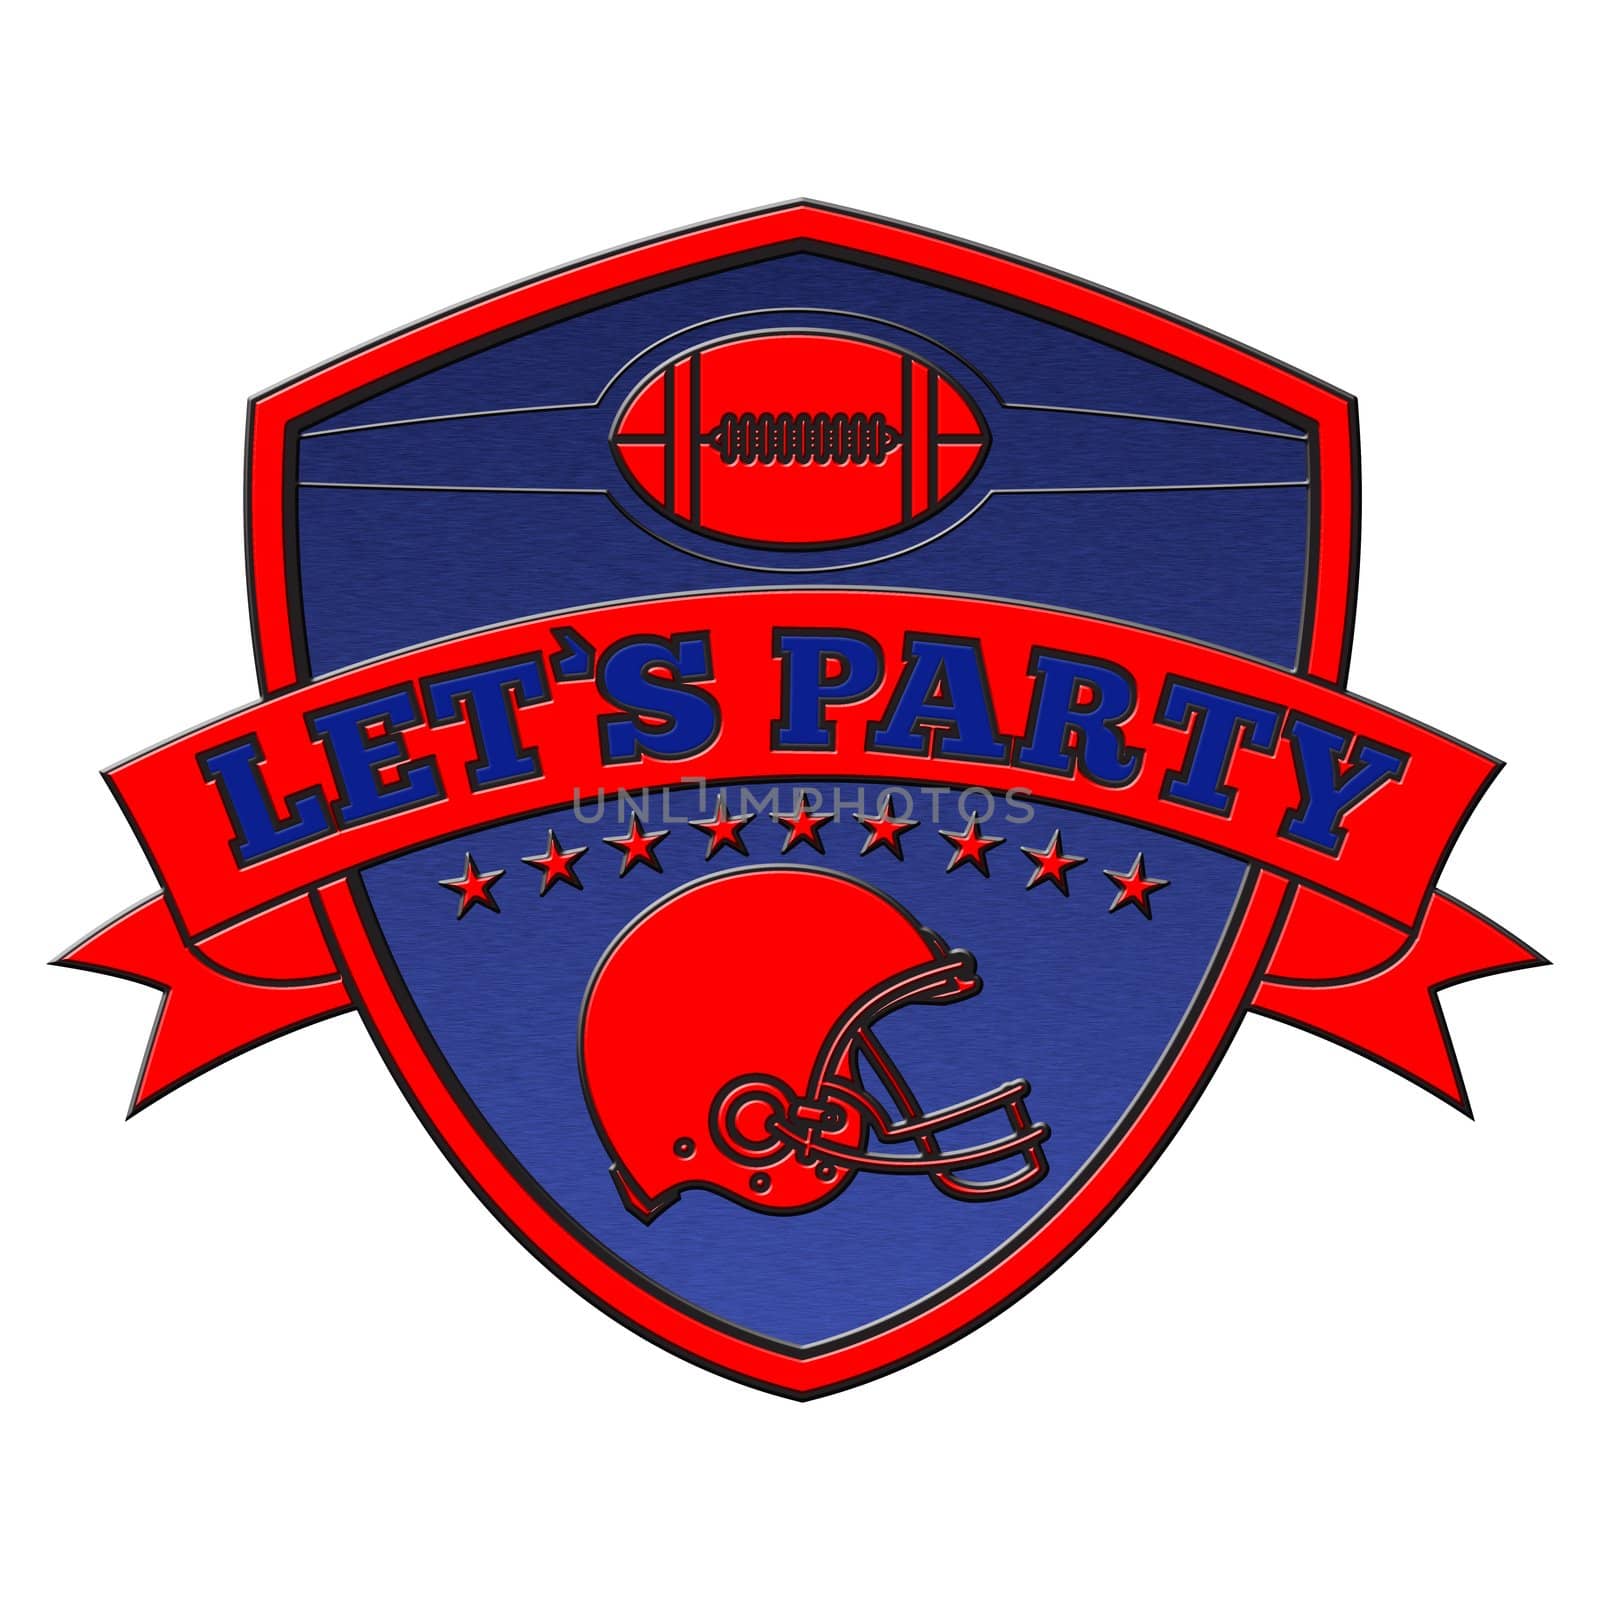 american football lets party shield by patrimonio